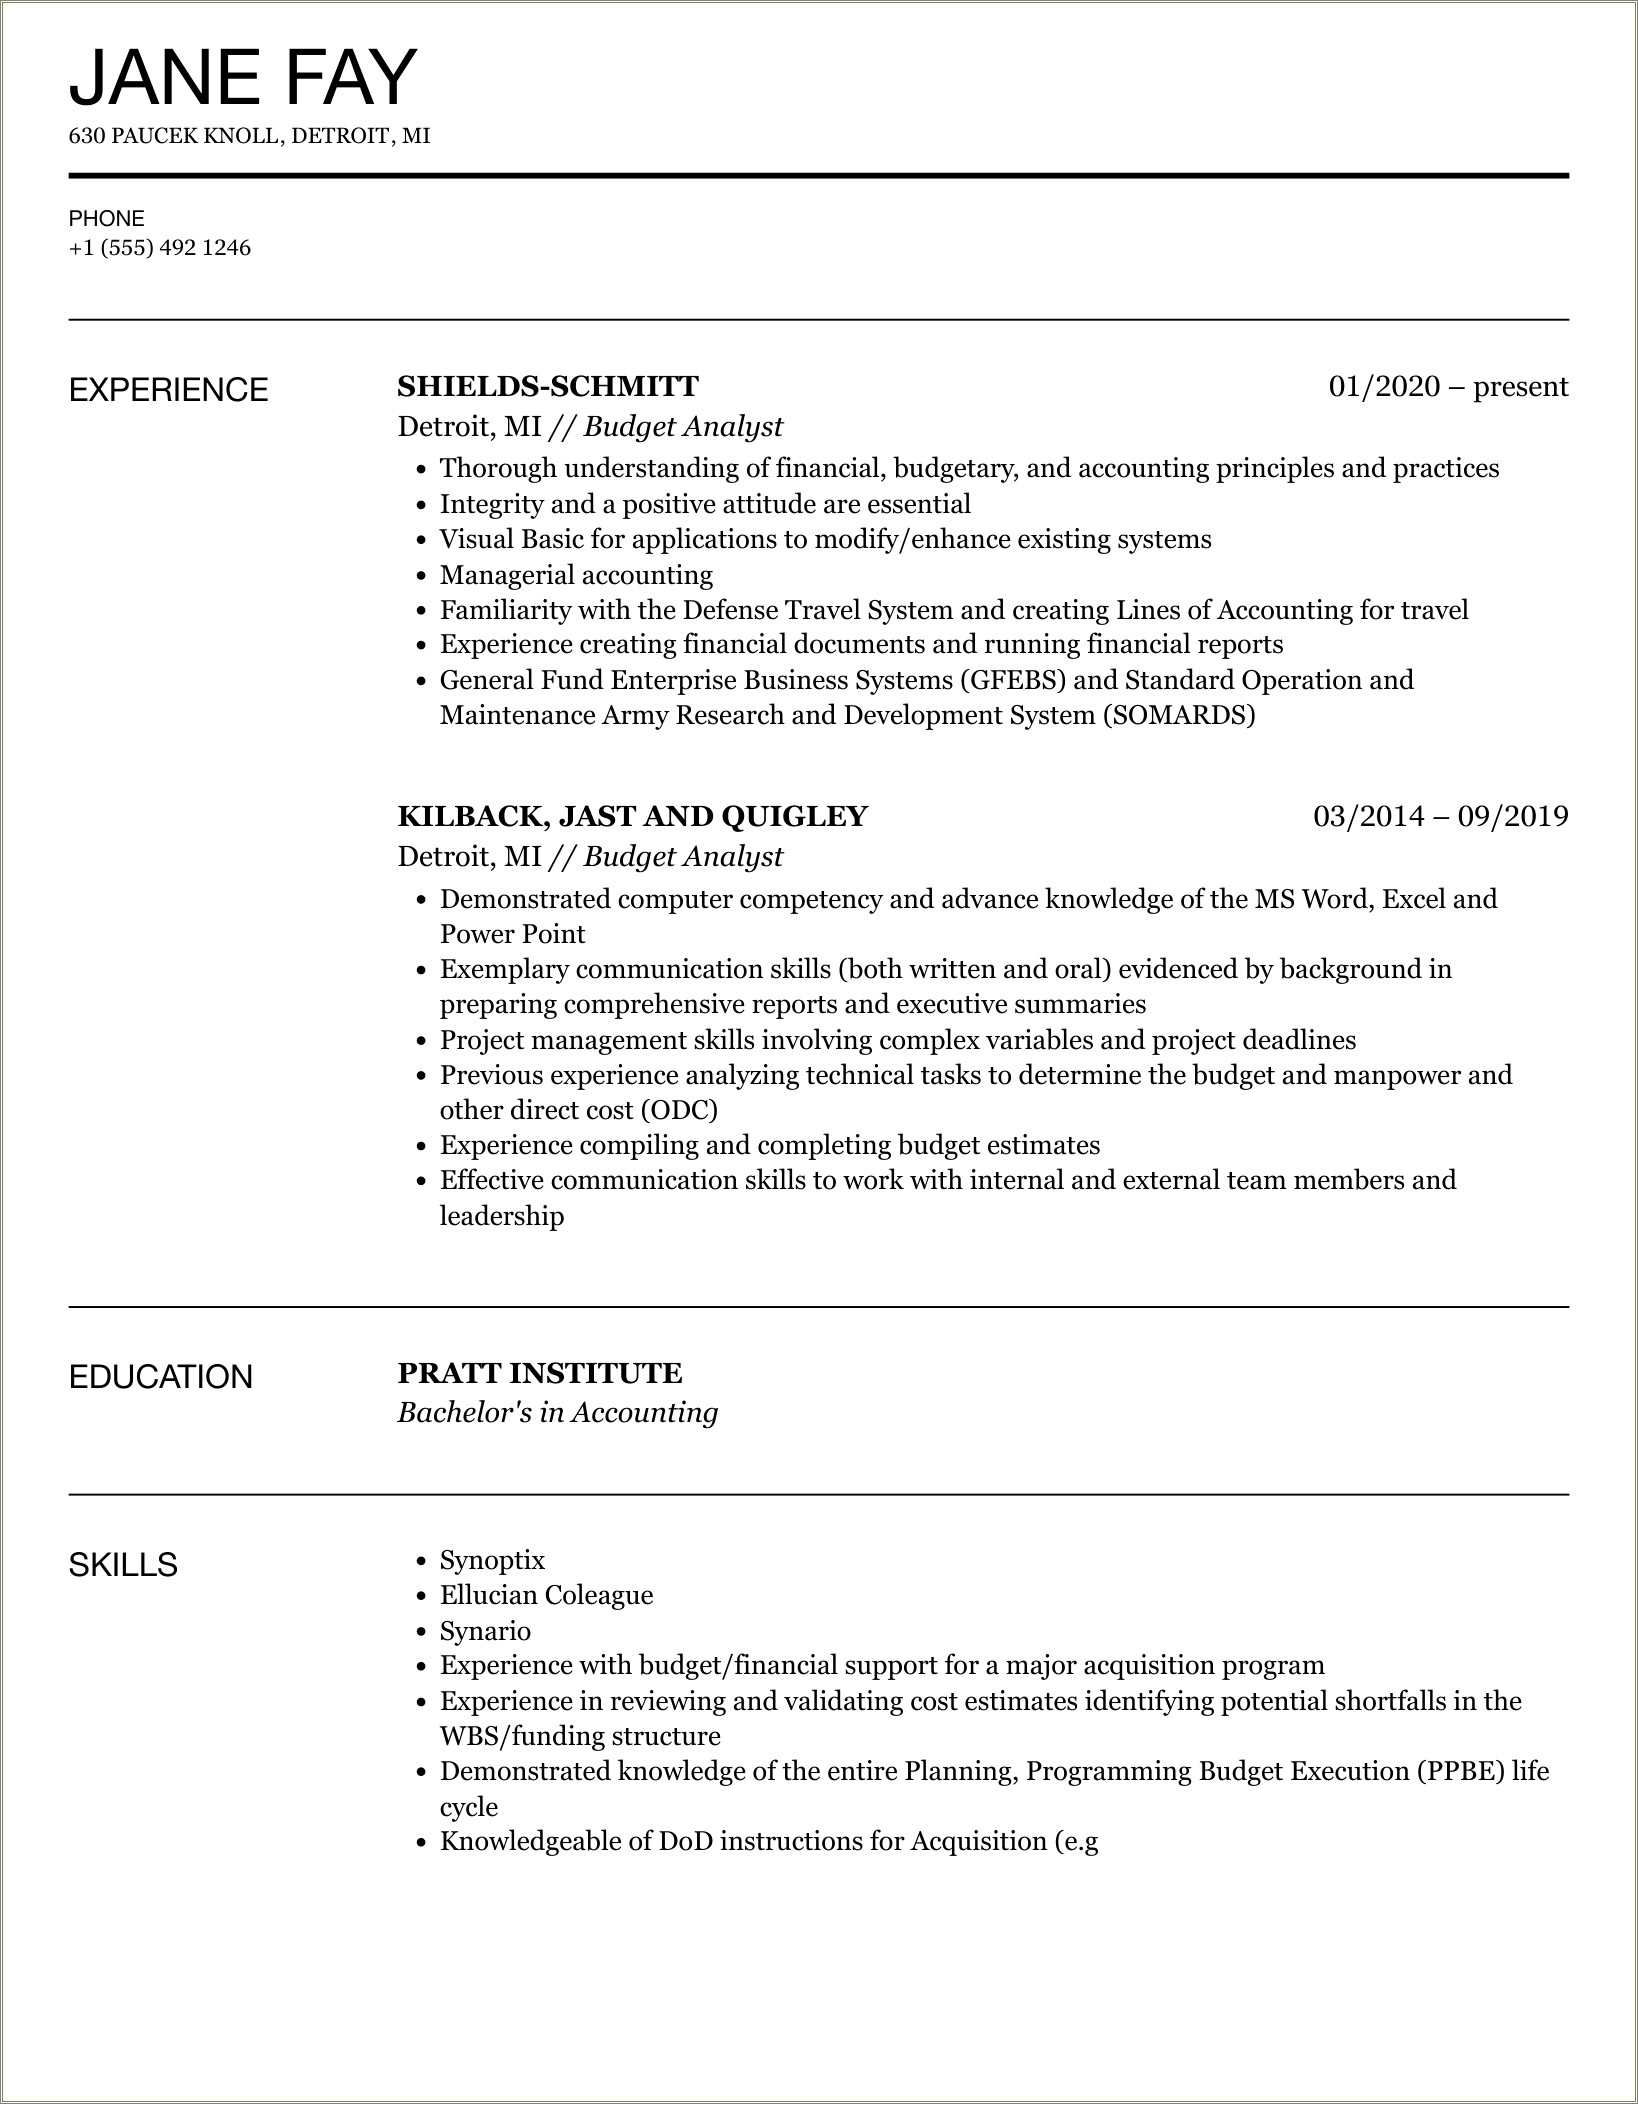 Gs09 Supply Systems Analyst Resume Samples